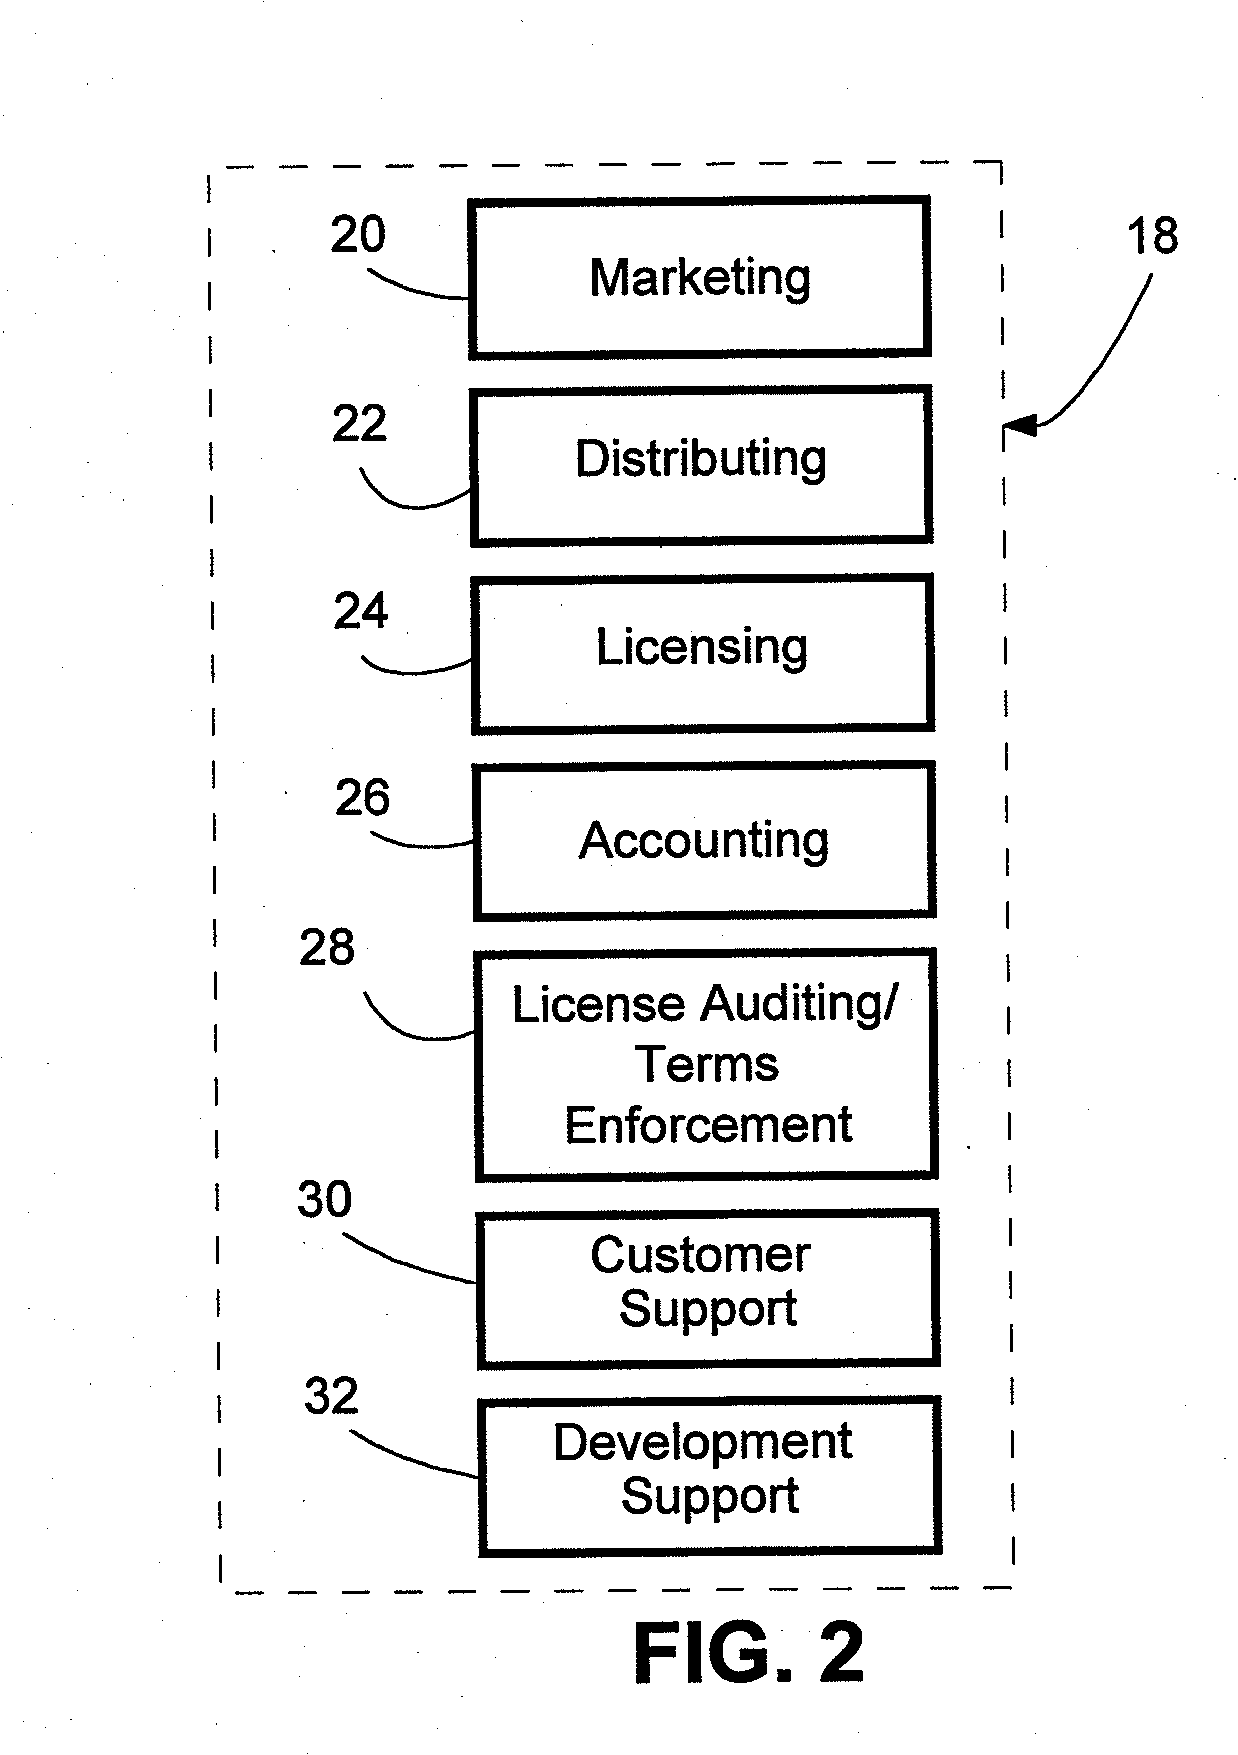 Distributing and billing software according to customer use of program modules